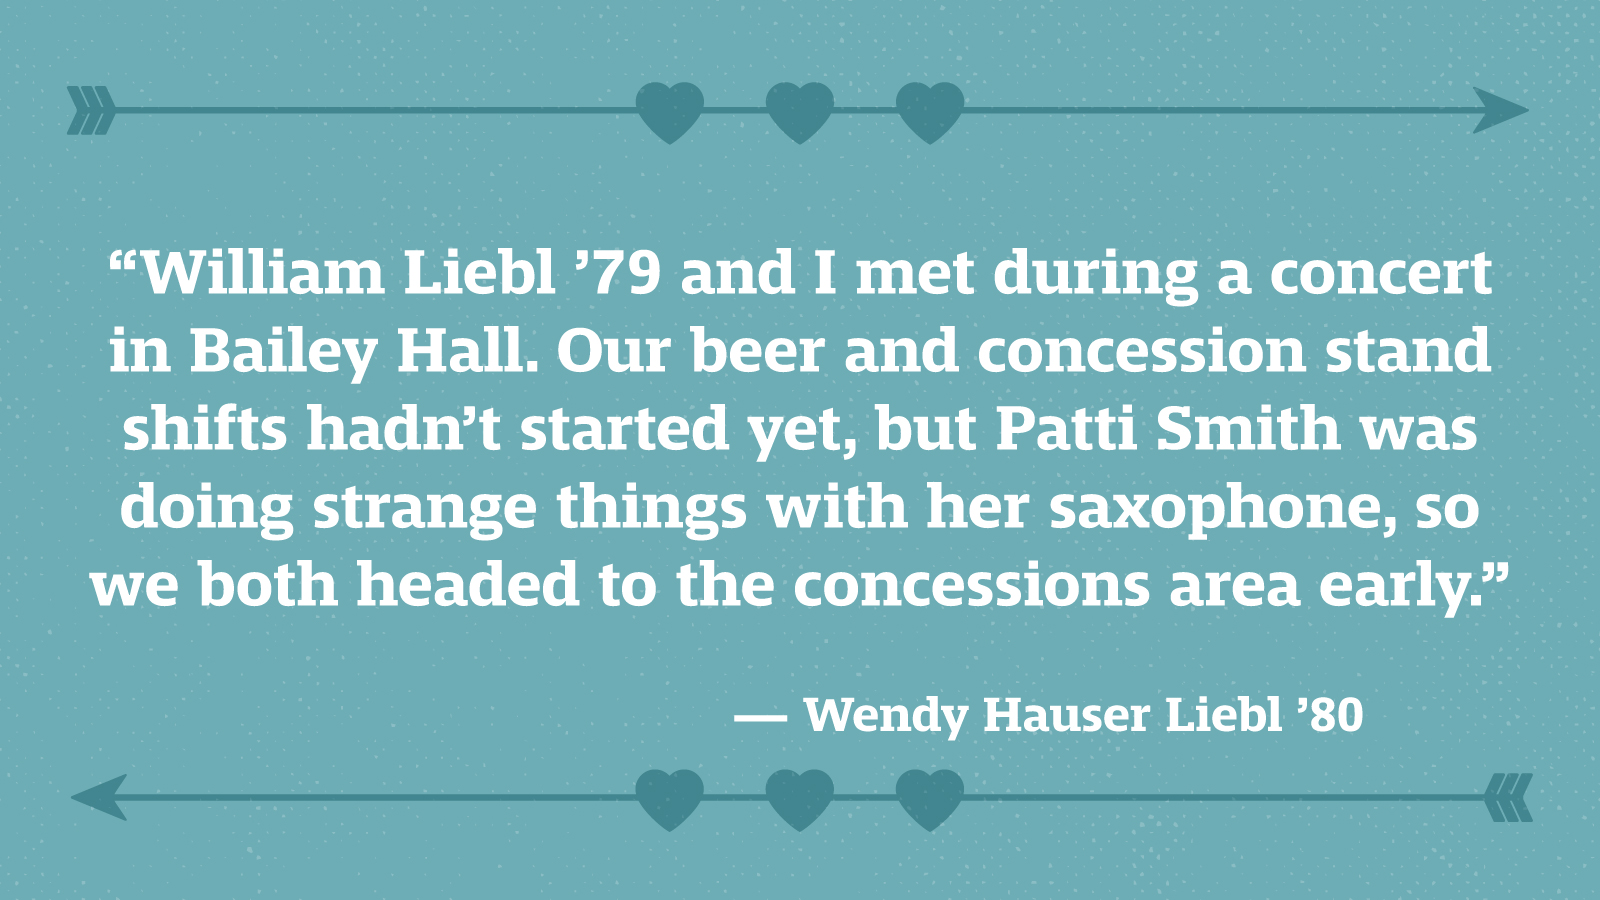 “William Liebl ’79 and I met during a concert in Bailey Hall. Our beer and concession stand shifts hadn’t started yet, but Patti Smith was doing strange things with her saxophone, so we both headed to the concessions area early.” — Wendy Hauser Liebl ’80